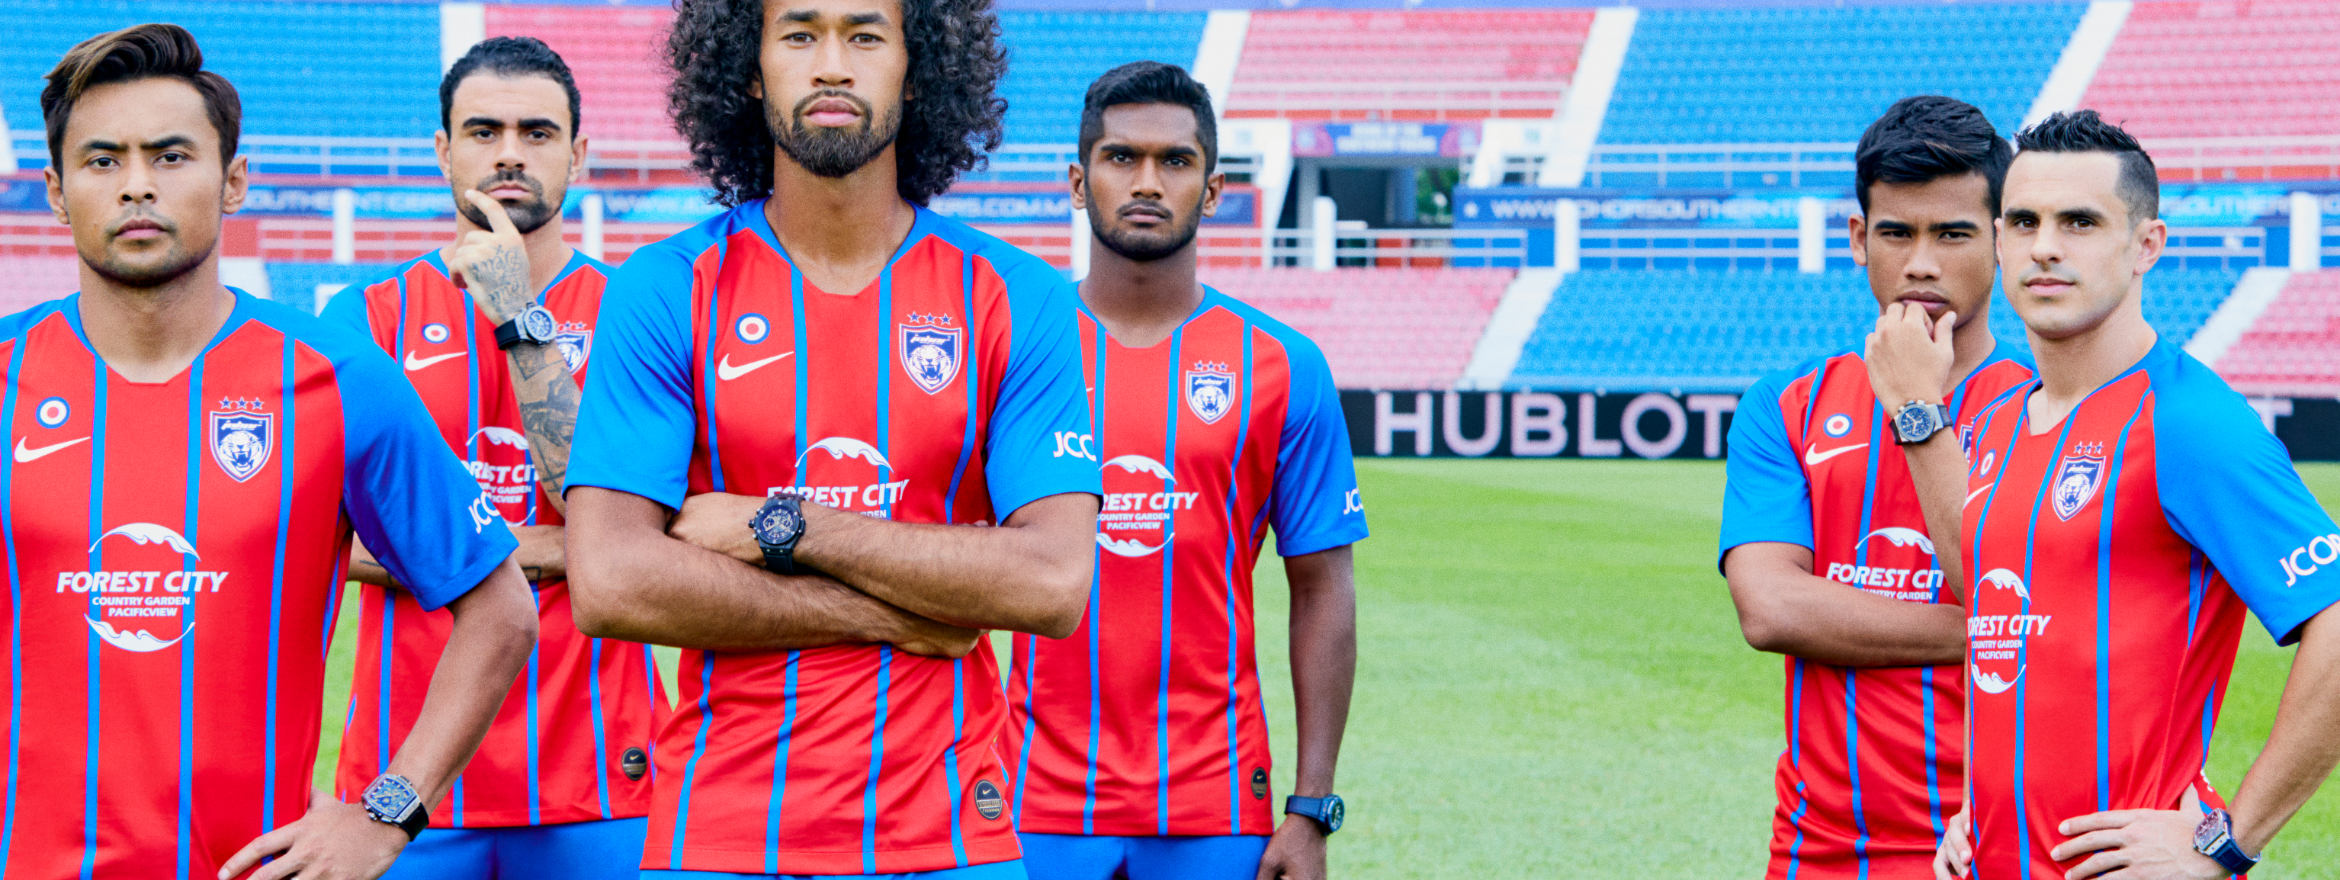 Hublot partners with Johor Darul Ta'zim . - The Hour Glass Official